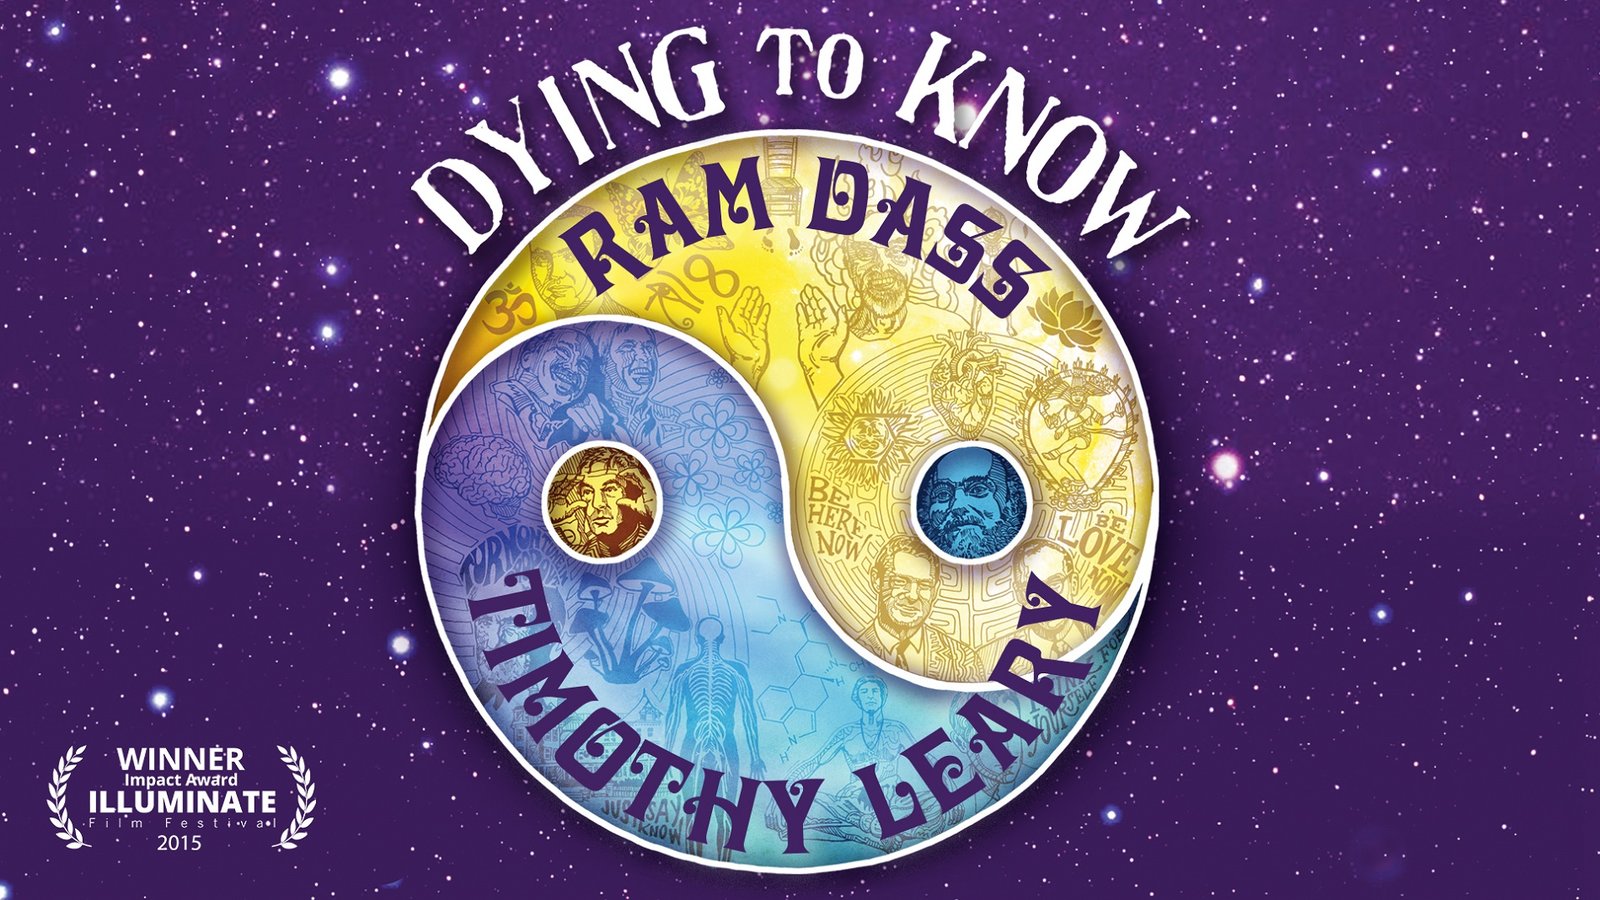 Dying to Know: Ram Dass & Timothy Leary (2014 - Full Documentary)